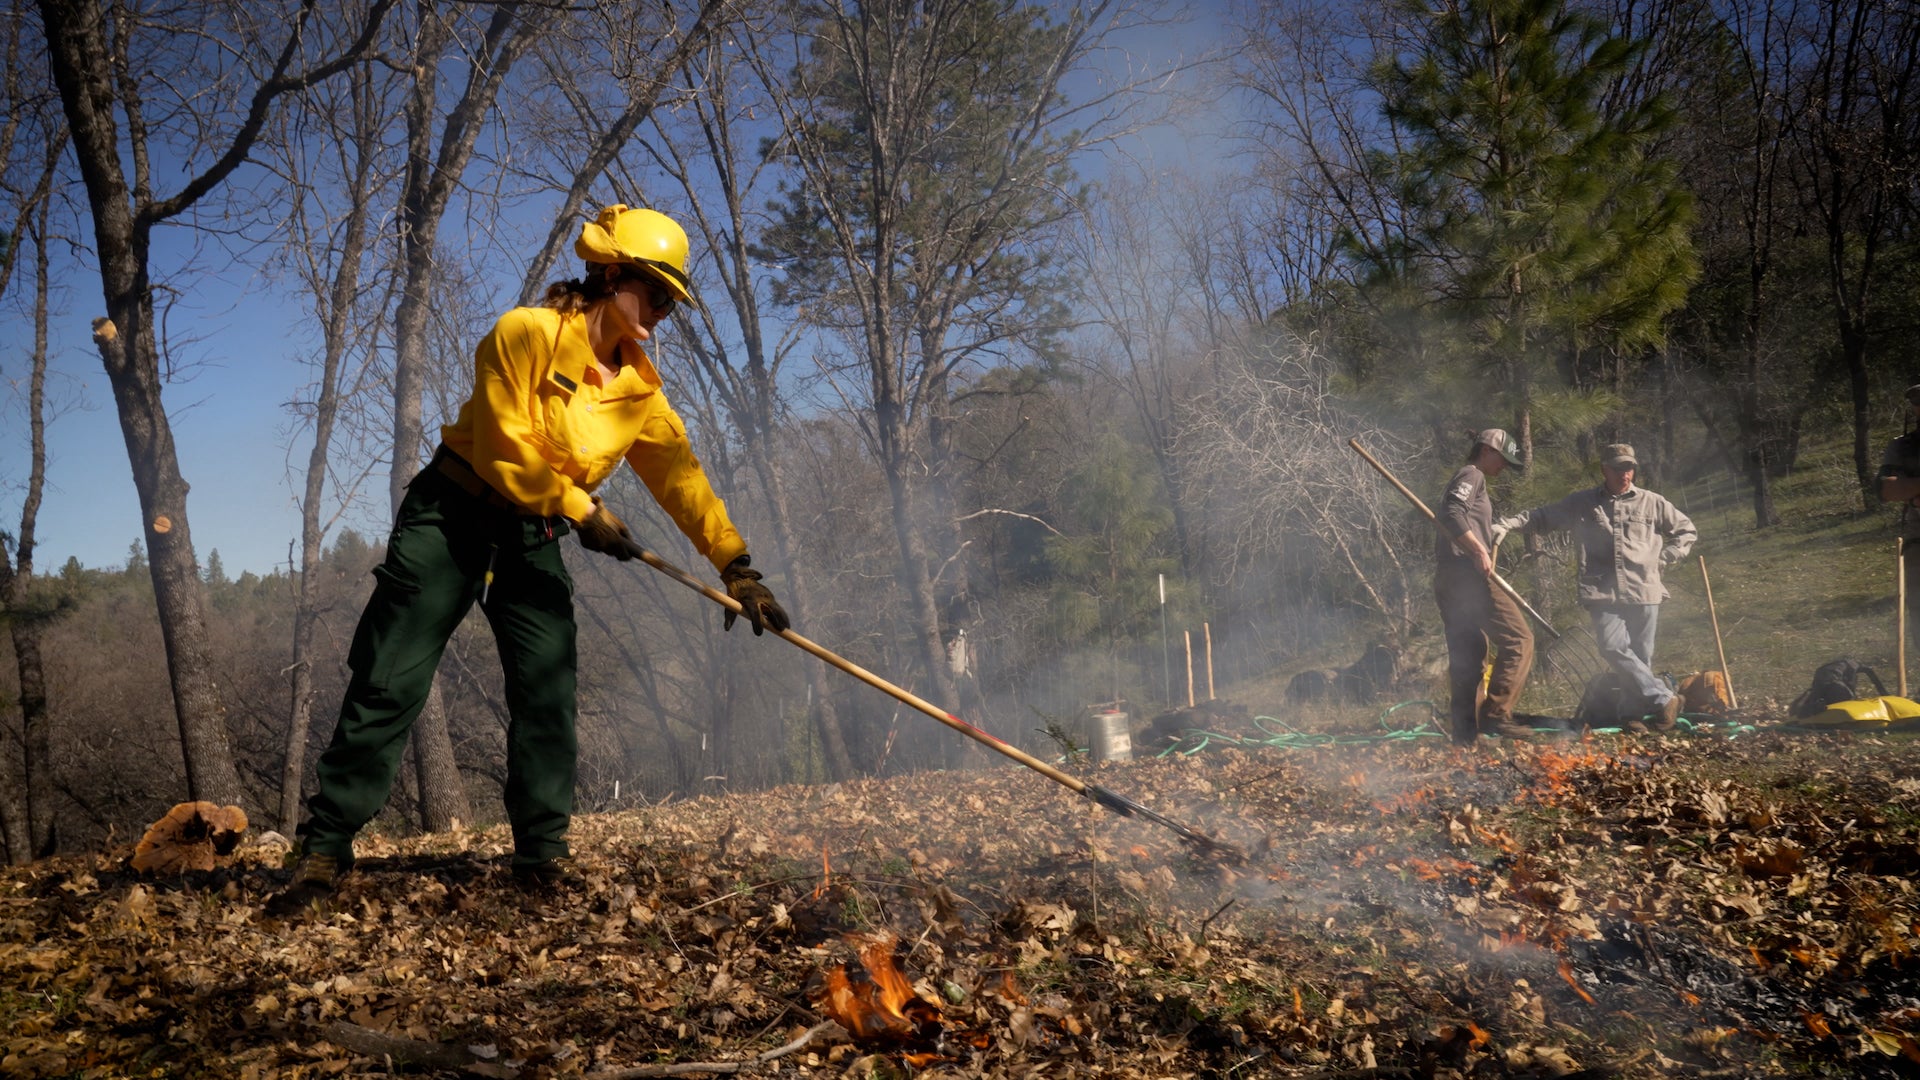 Female firefighter rakes leaves while tending a prescribed burn, with people in distance